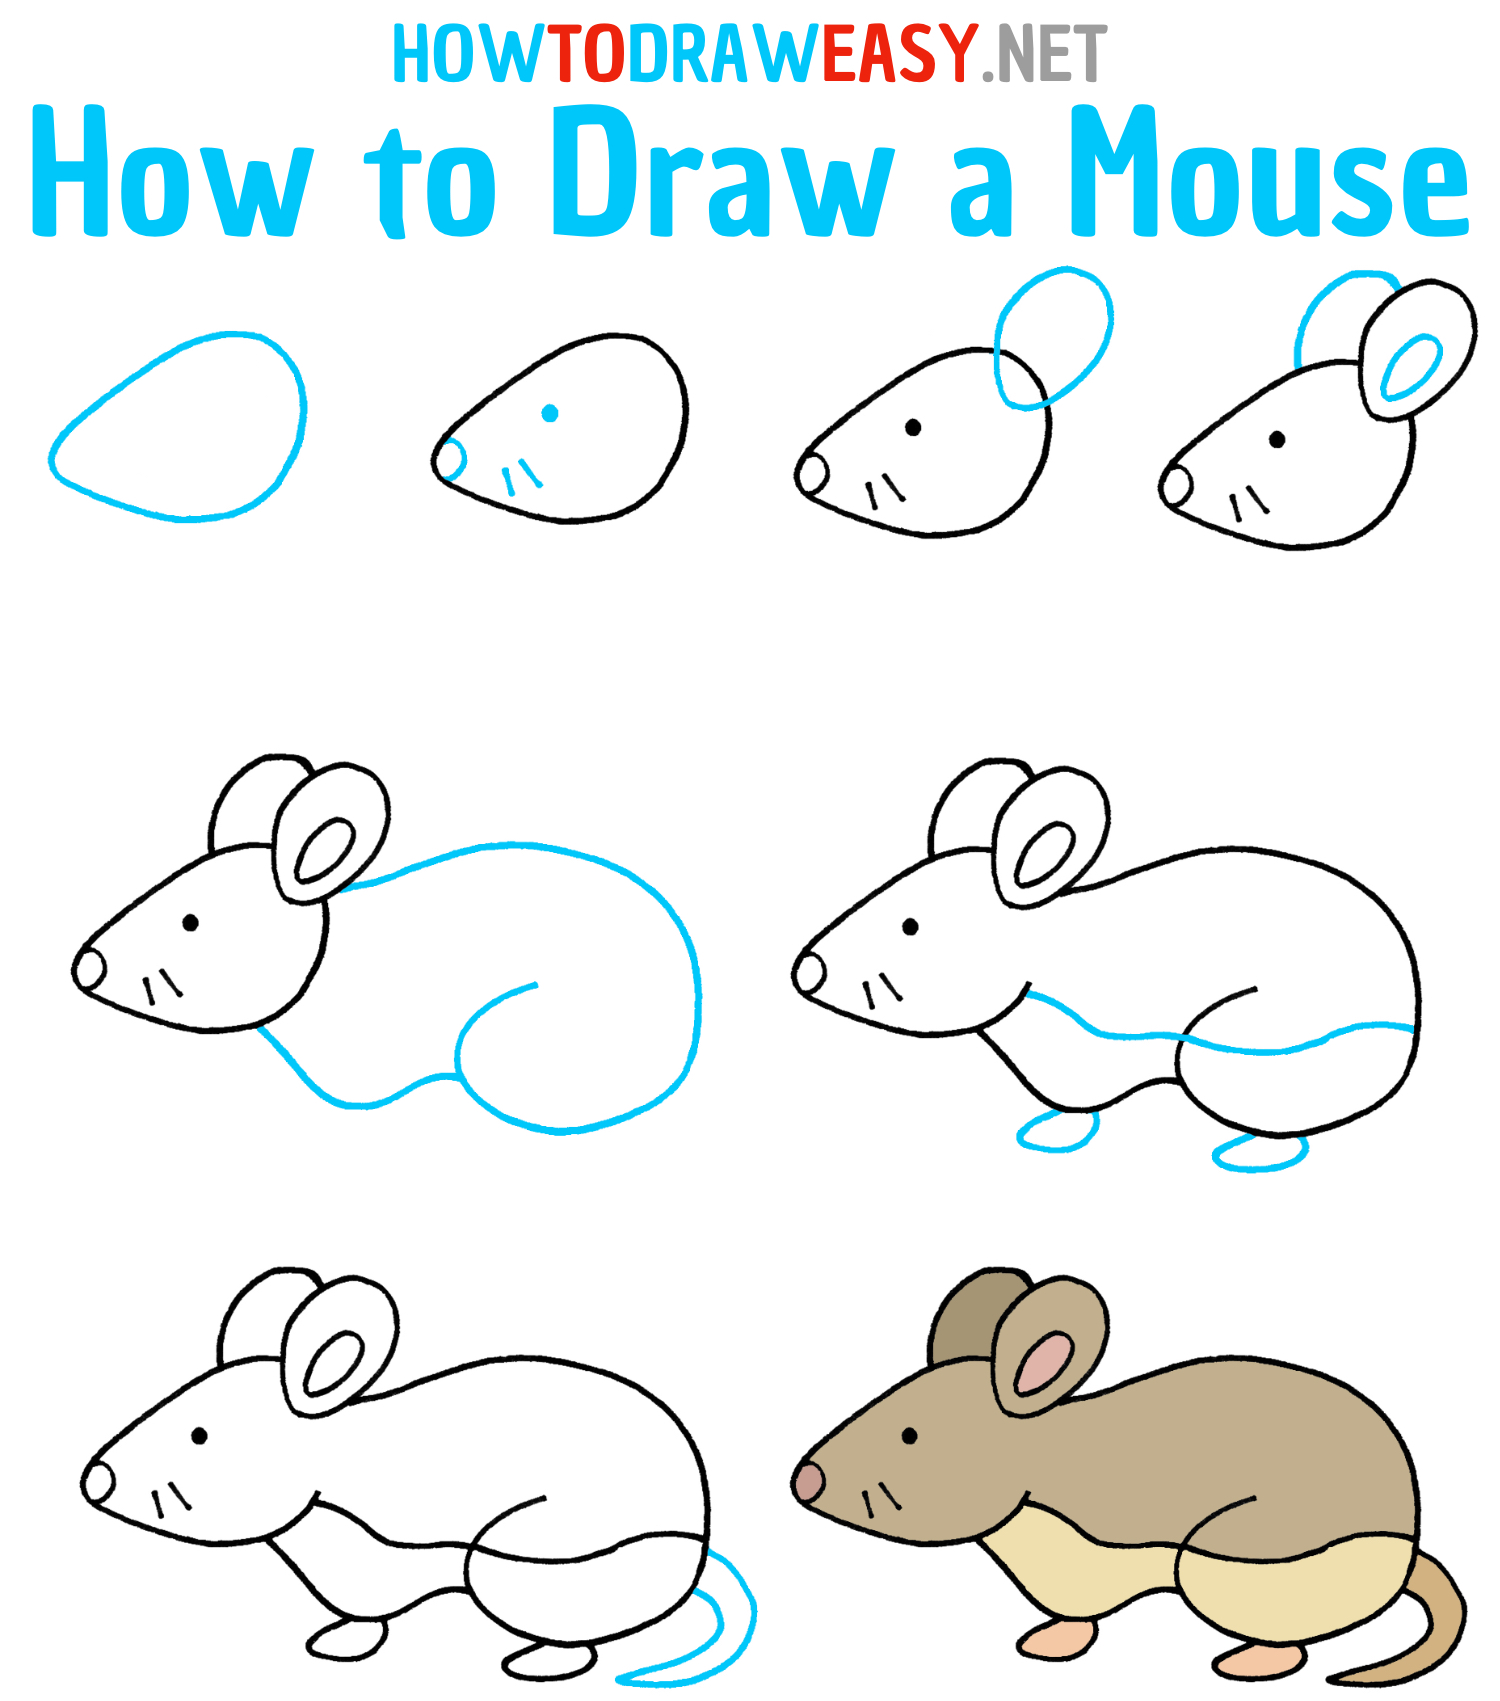 How to Draw a Mouse Step by Step